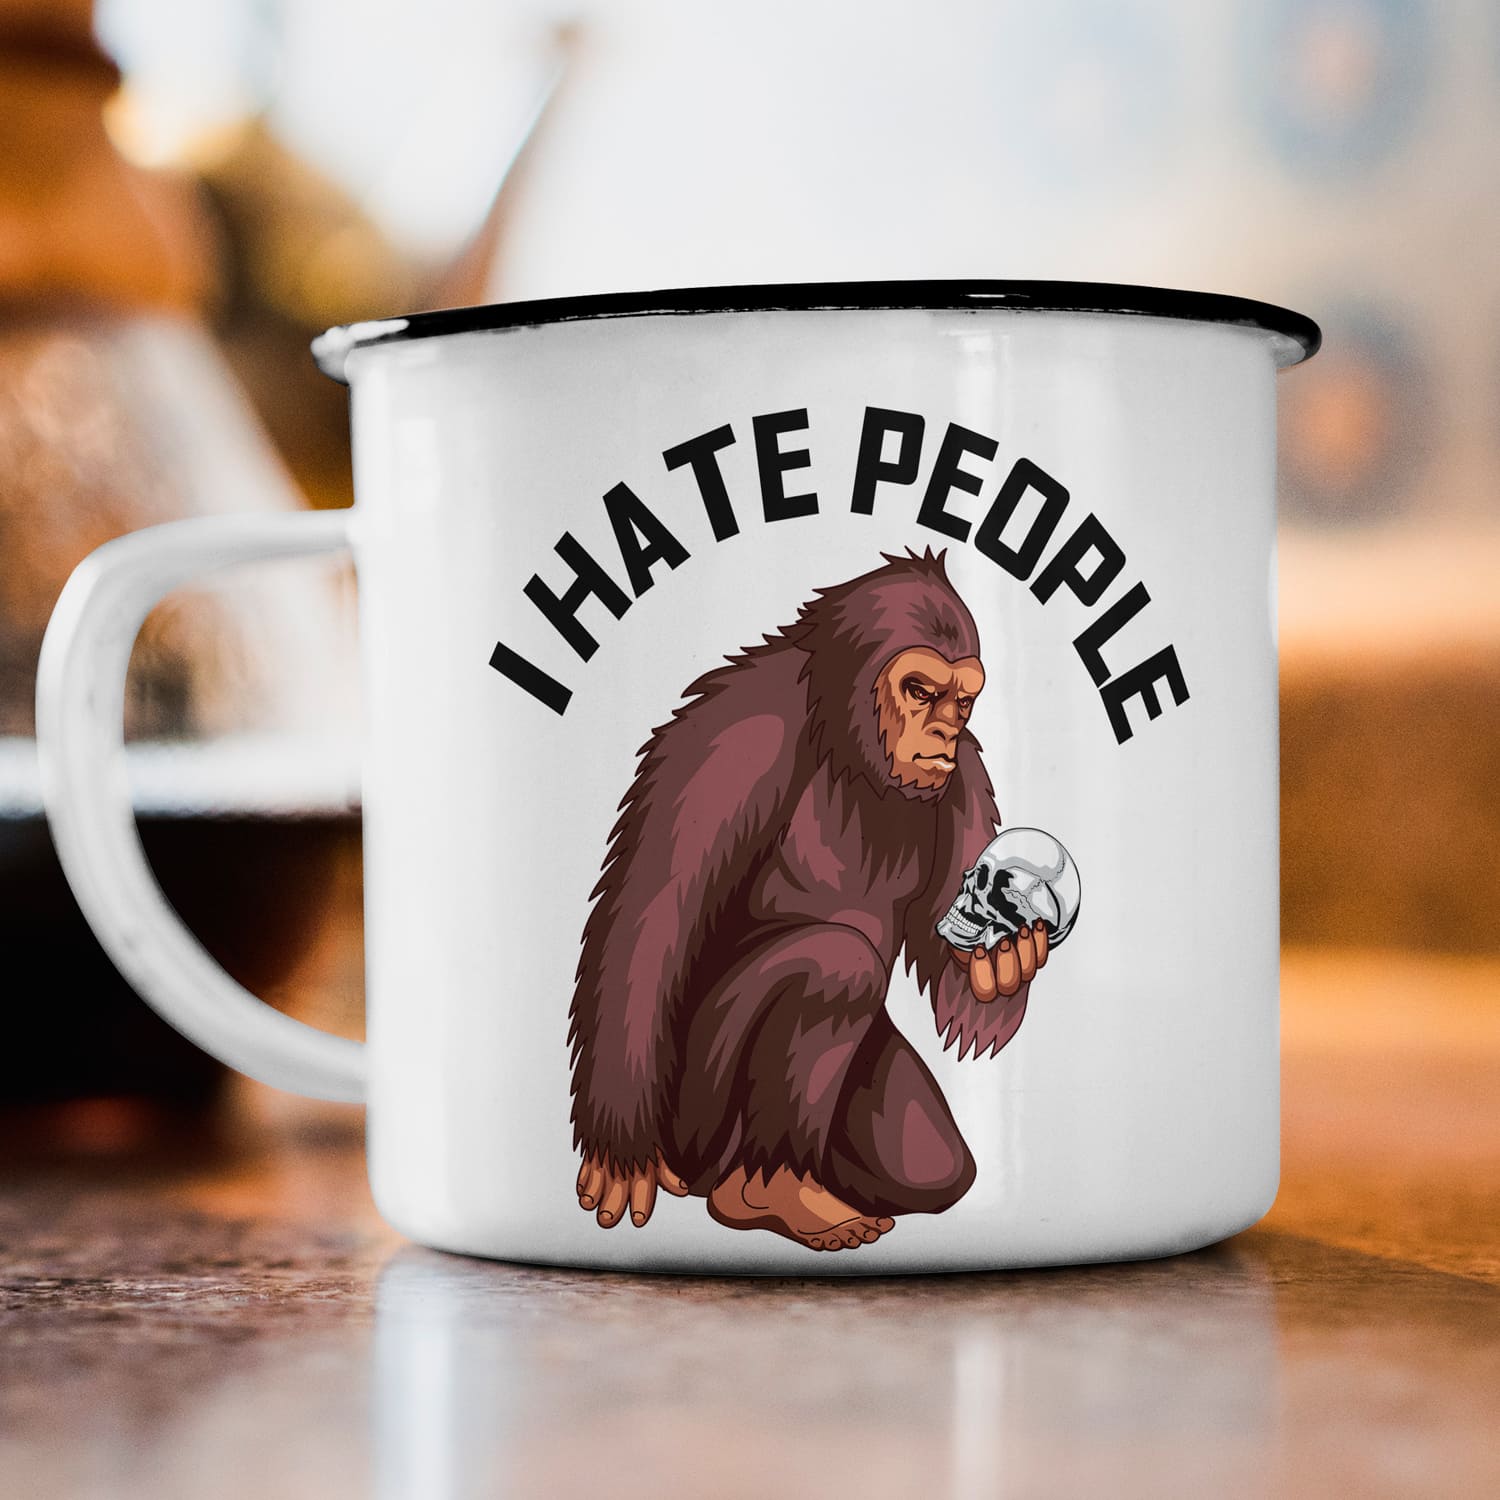 White and black coffee mug with a picture of a monkey on it.